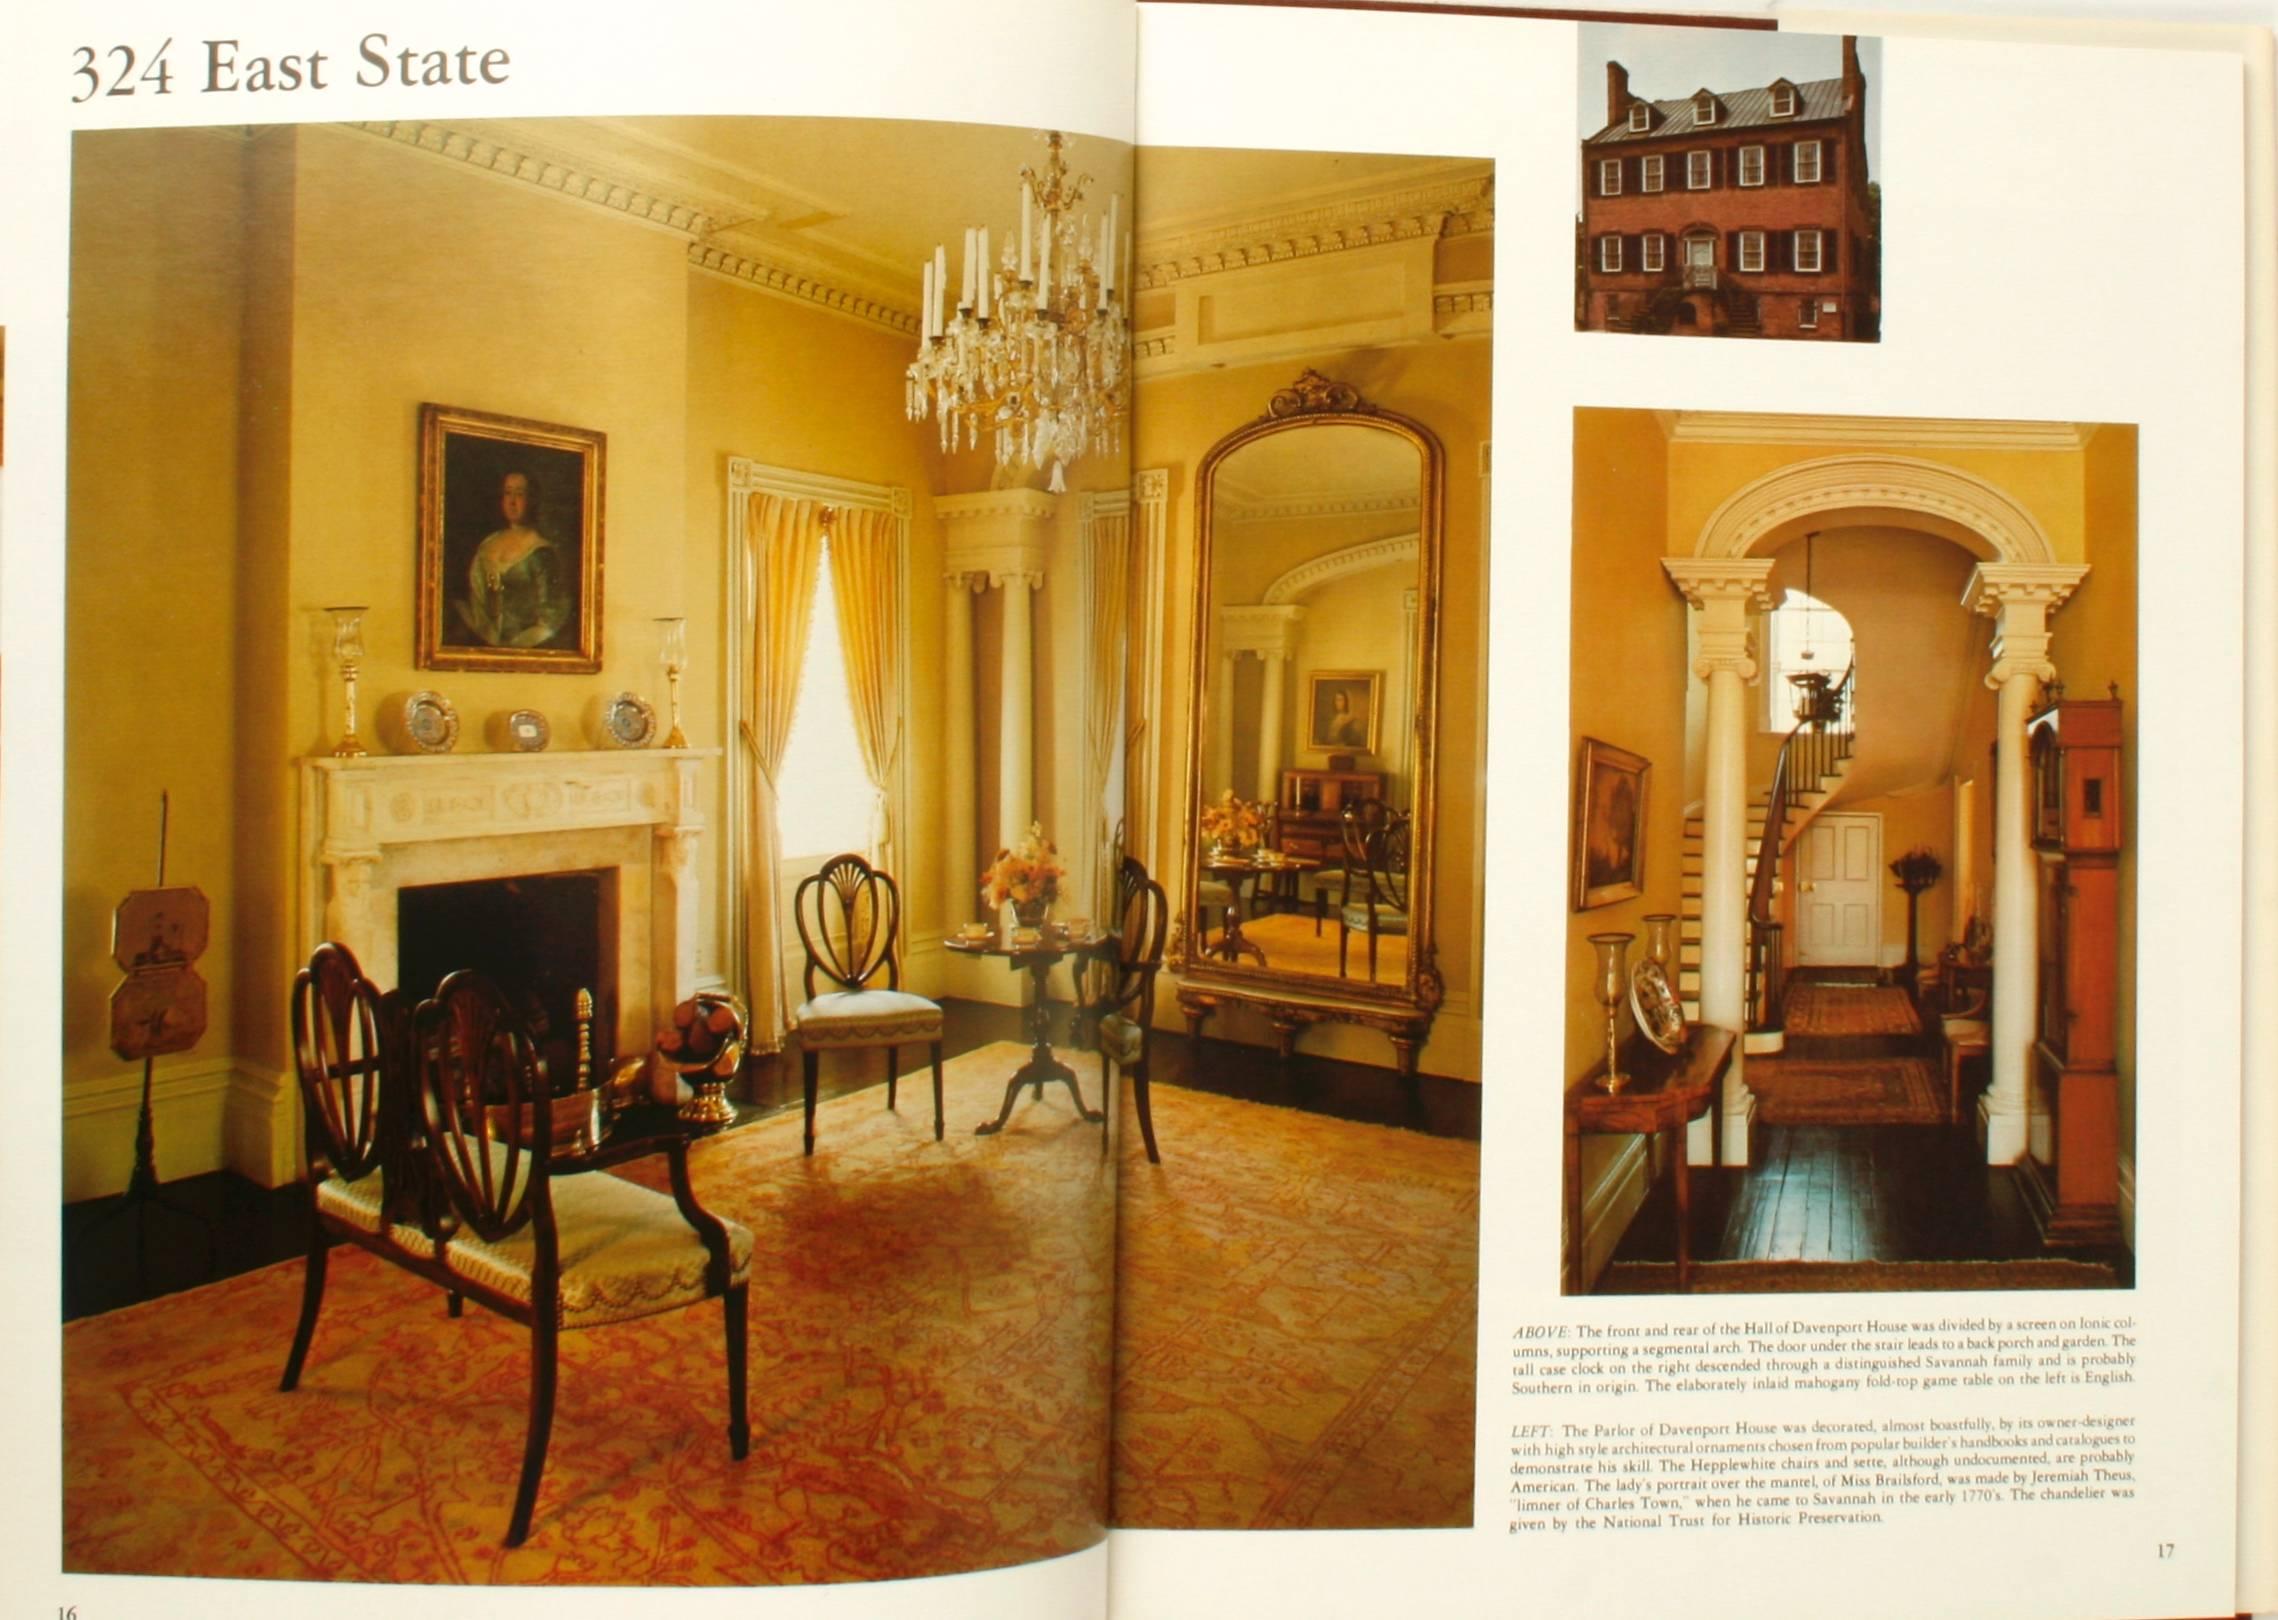 At Home in Savannah, Great Interiors. Boca Raton: Gold Coast Publishing. First edition hardcover with dust jacket, 1978. 87 pp. A photographic overview of 21 houses and their interiors in Savannah Georgia with an introduction of the history of the